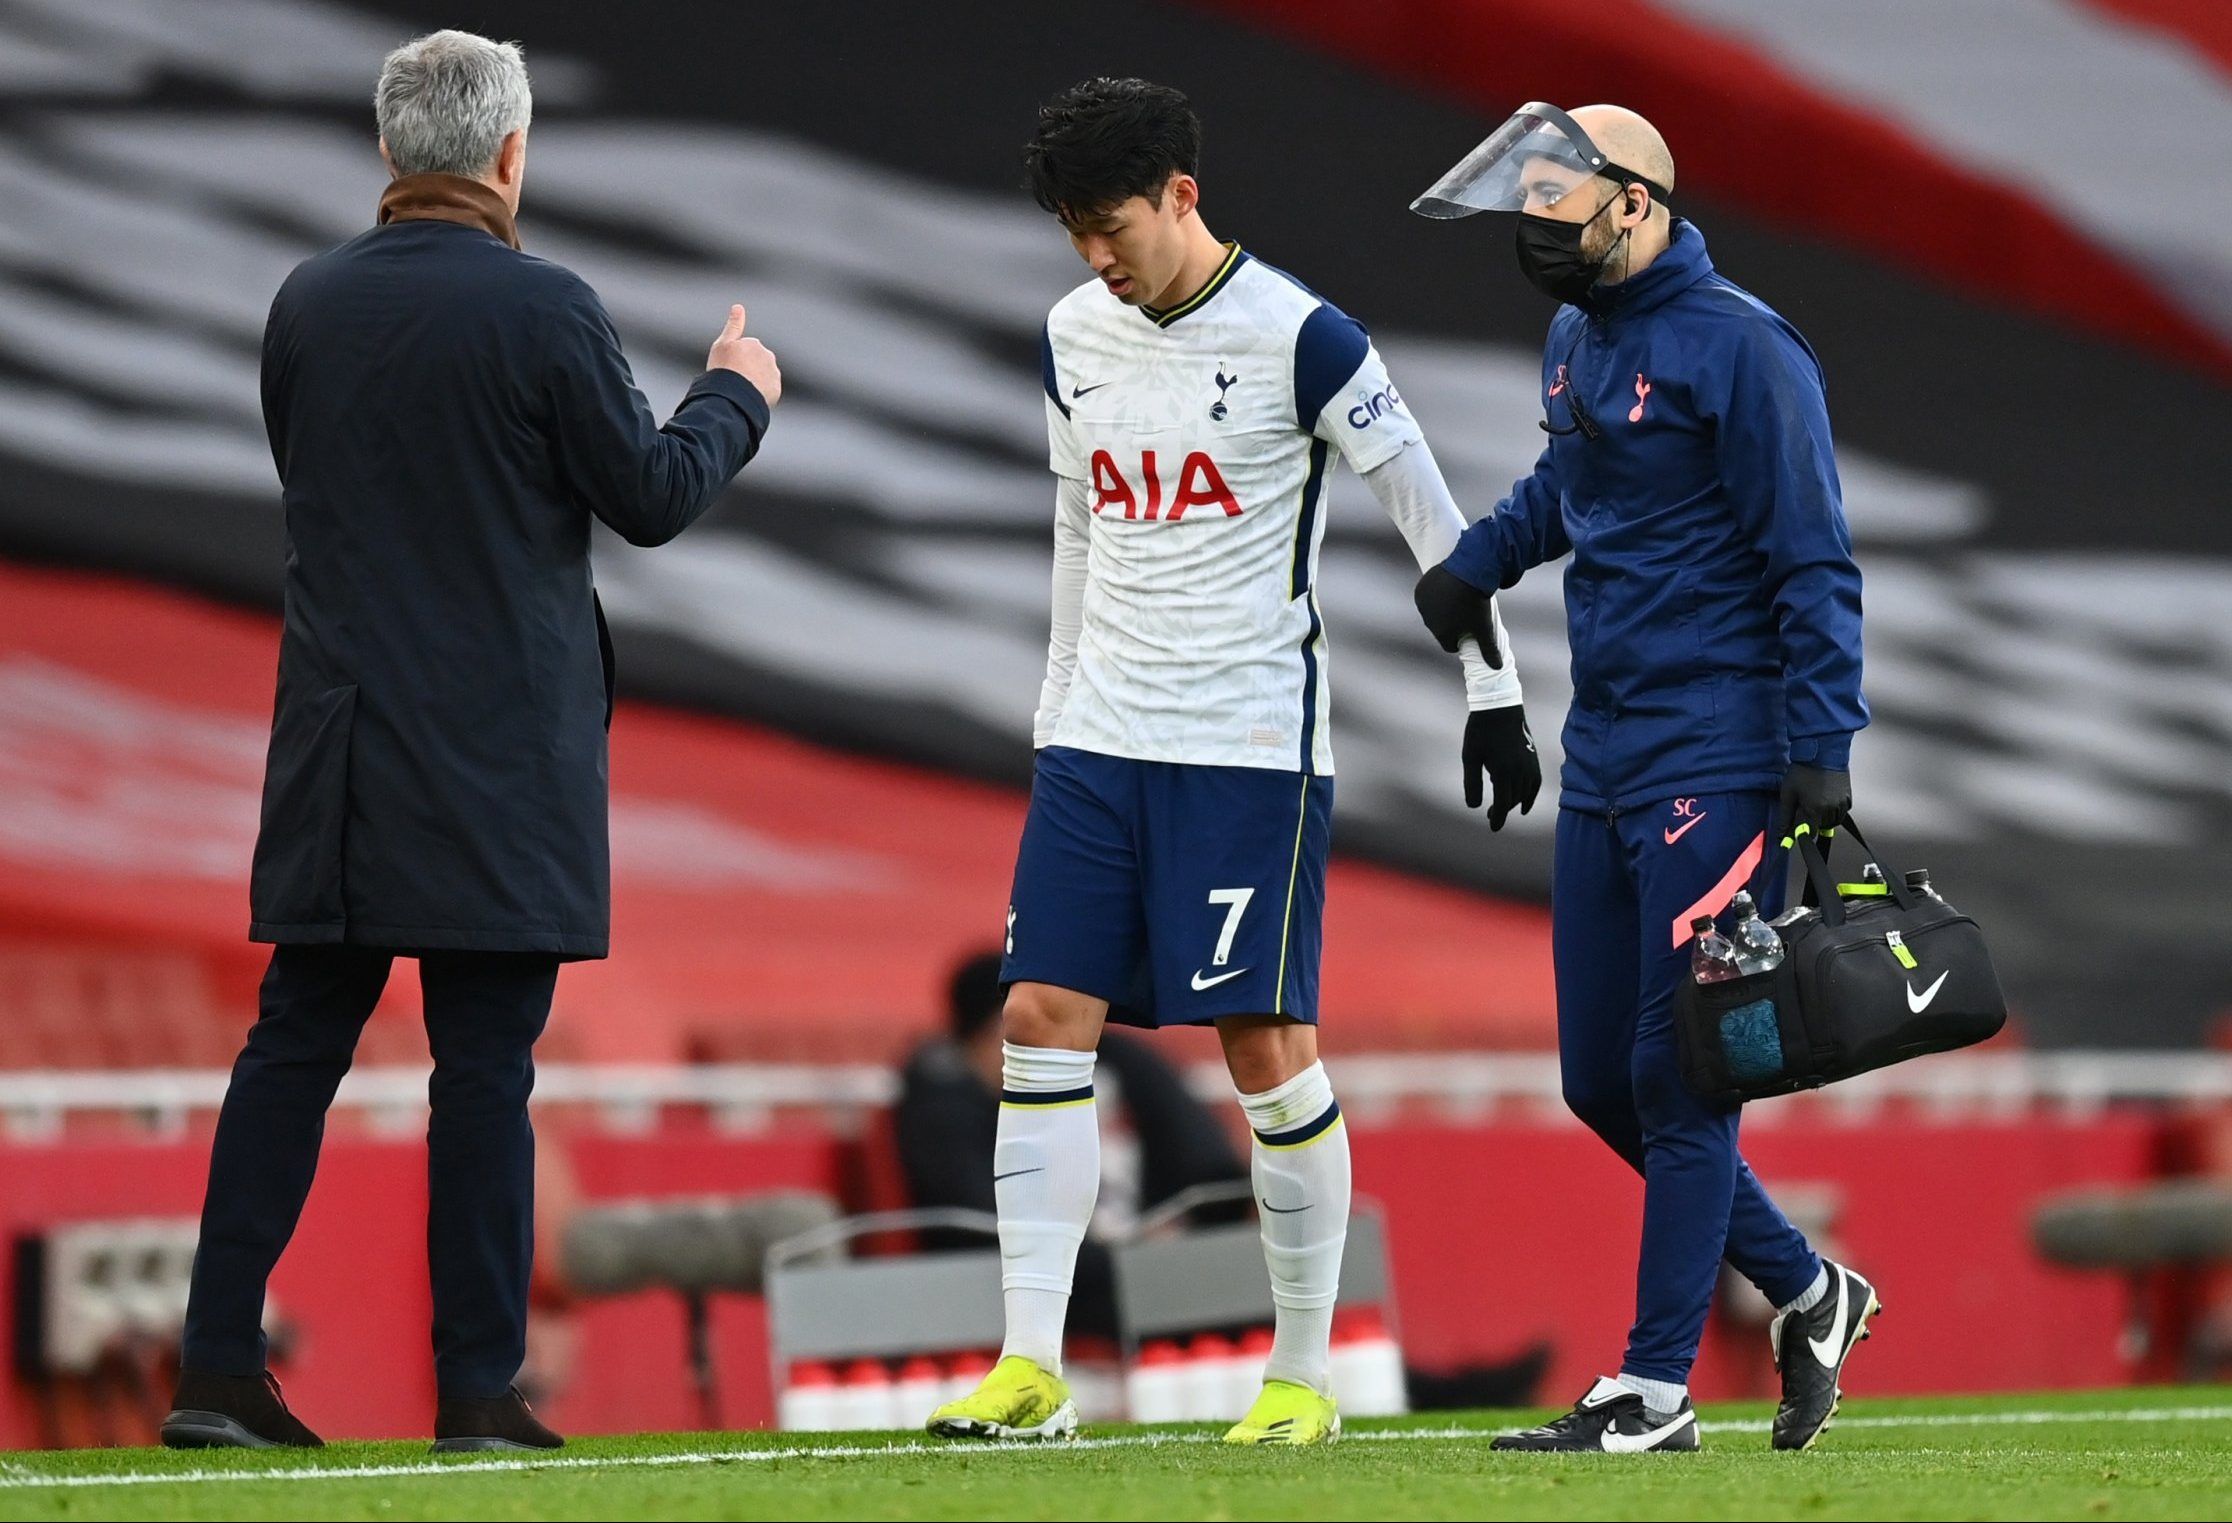 spurs heung-min son comes off injured vs arsenal north london derby premier league mourinho